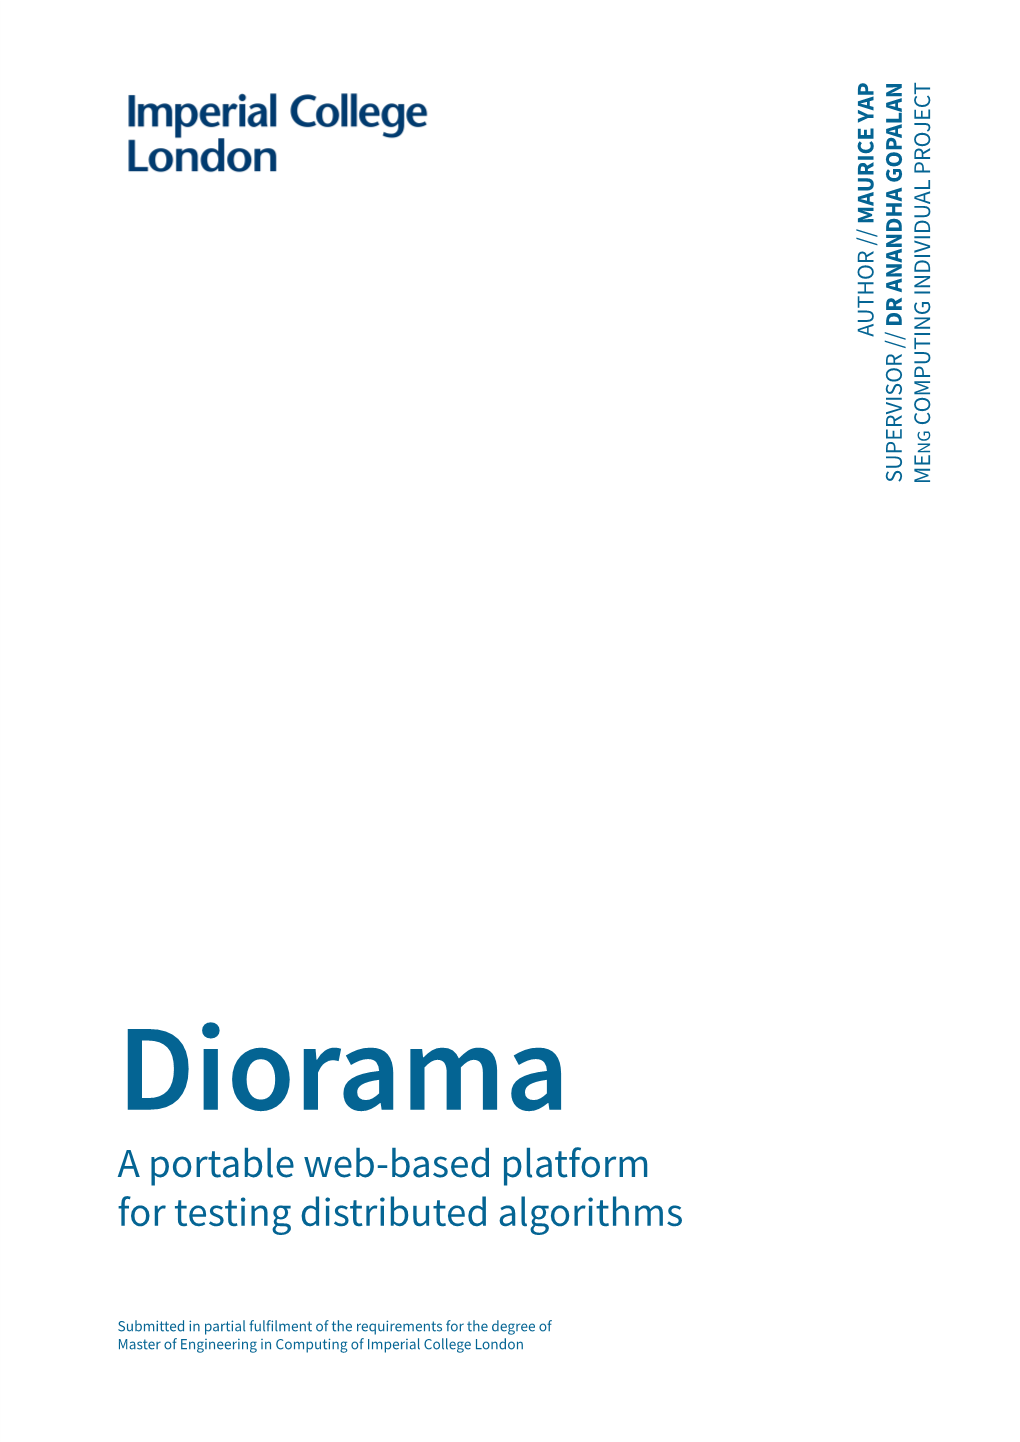 Diorama: a Portable Web-Based Platform for Testing Distributed